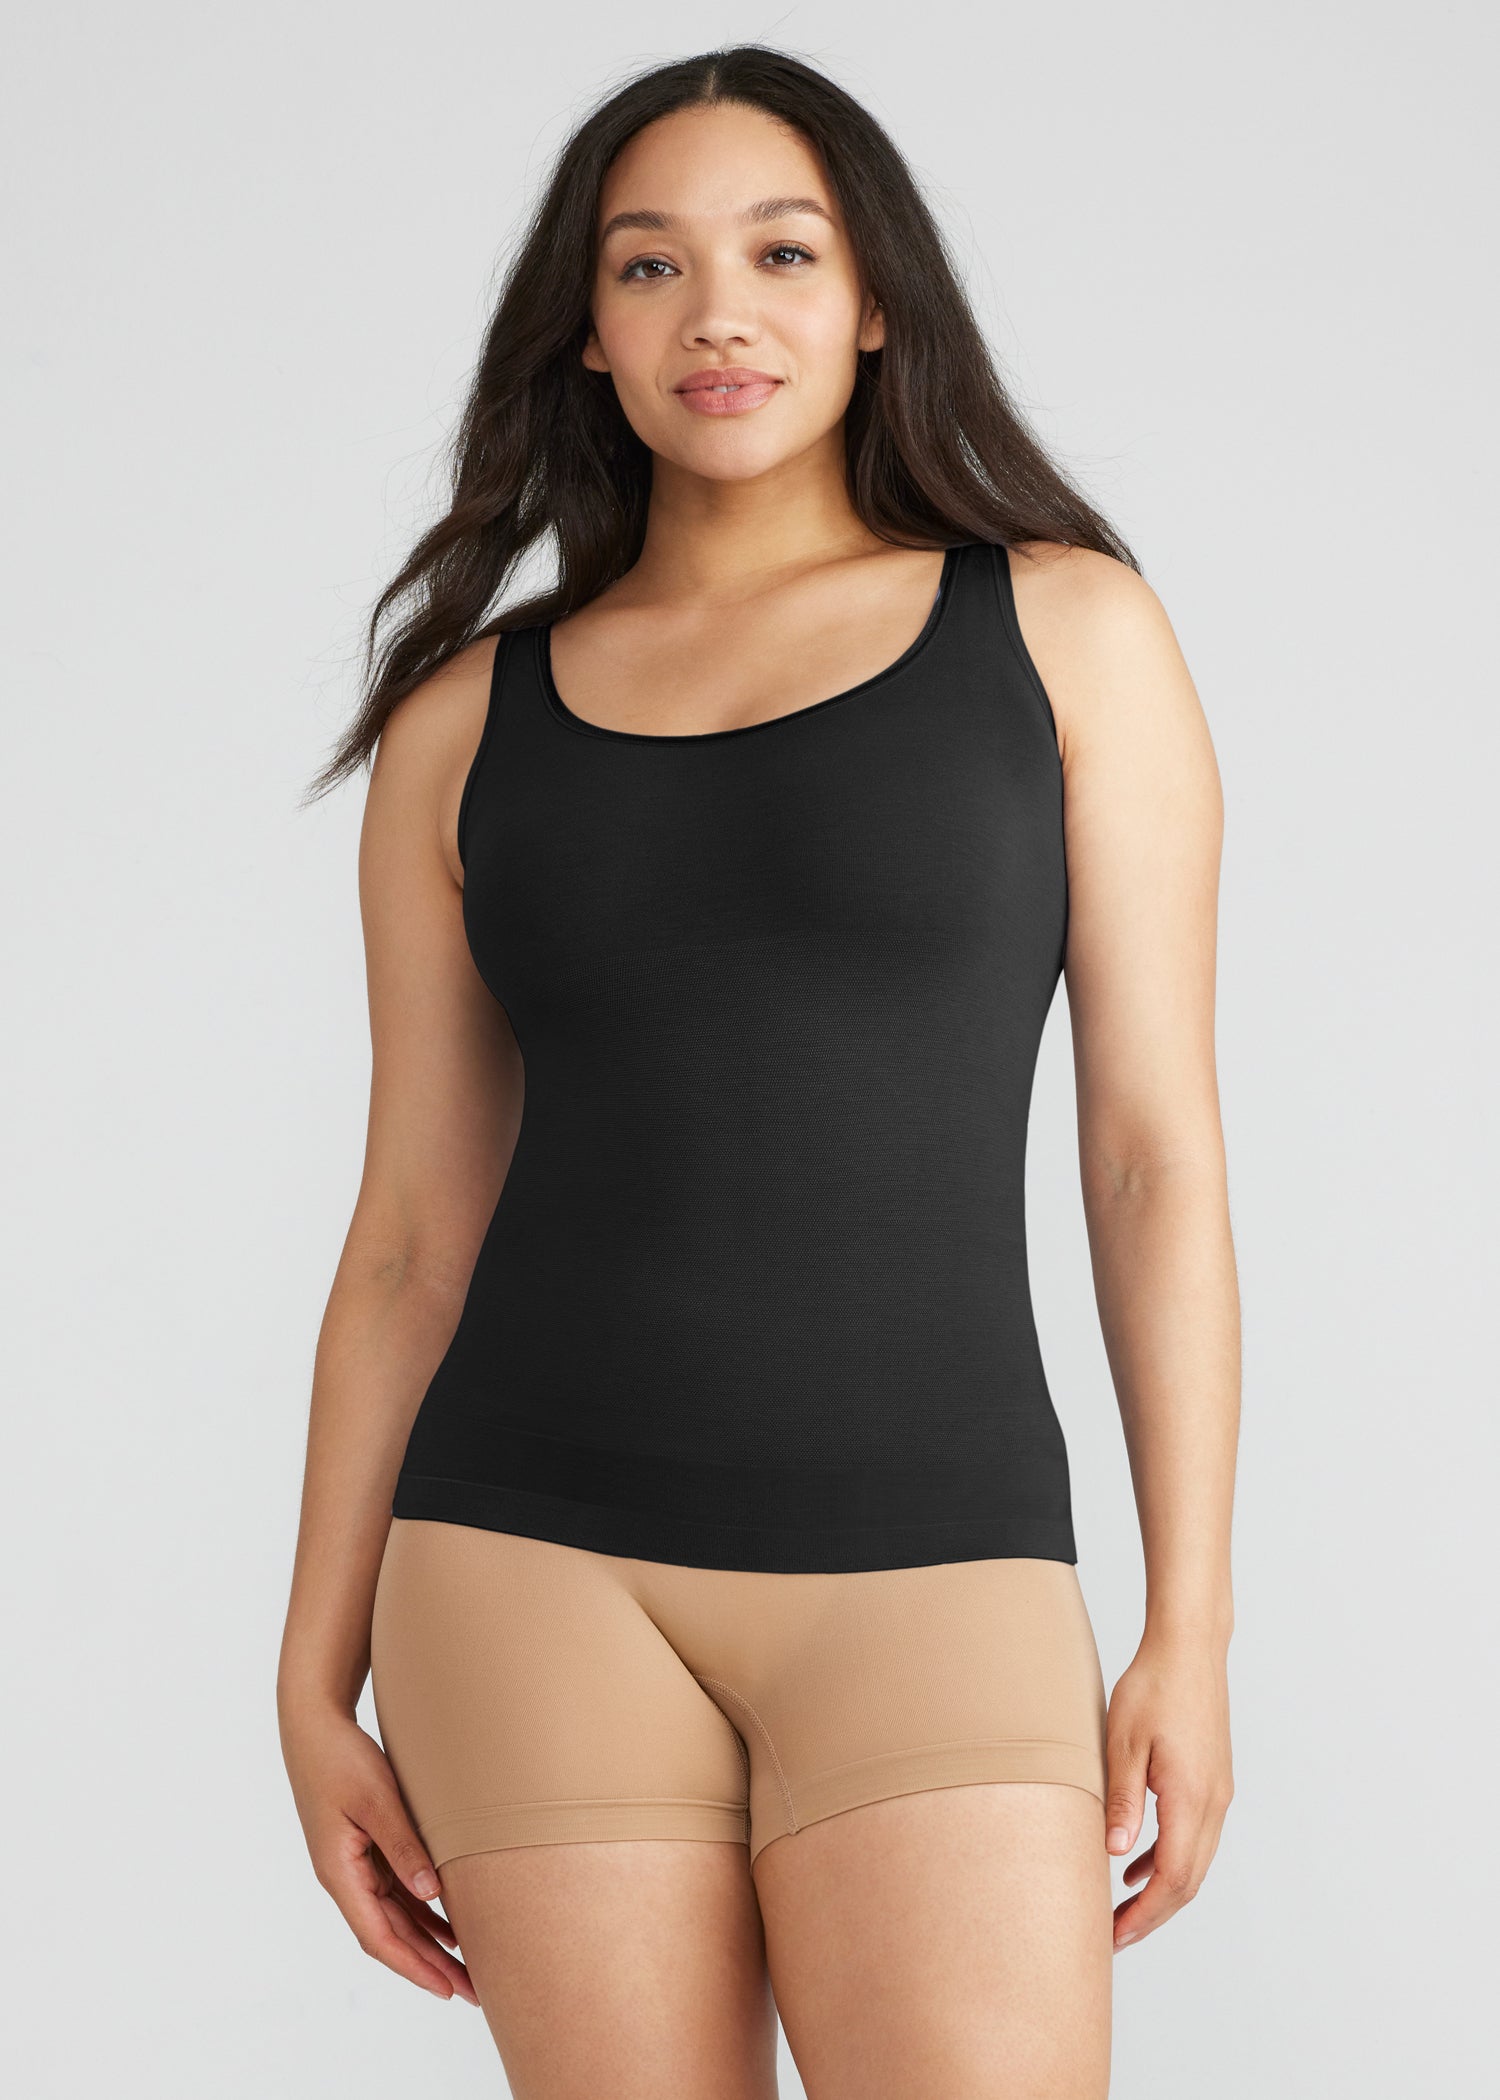 Yummie Seamless Full-Back Tank Body Suit in Frappe, L/XL (607672)